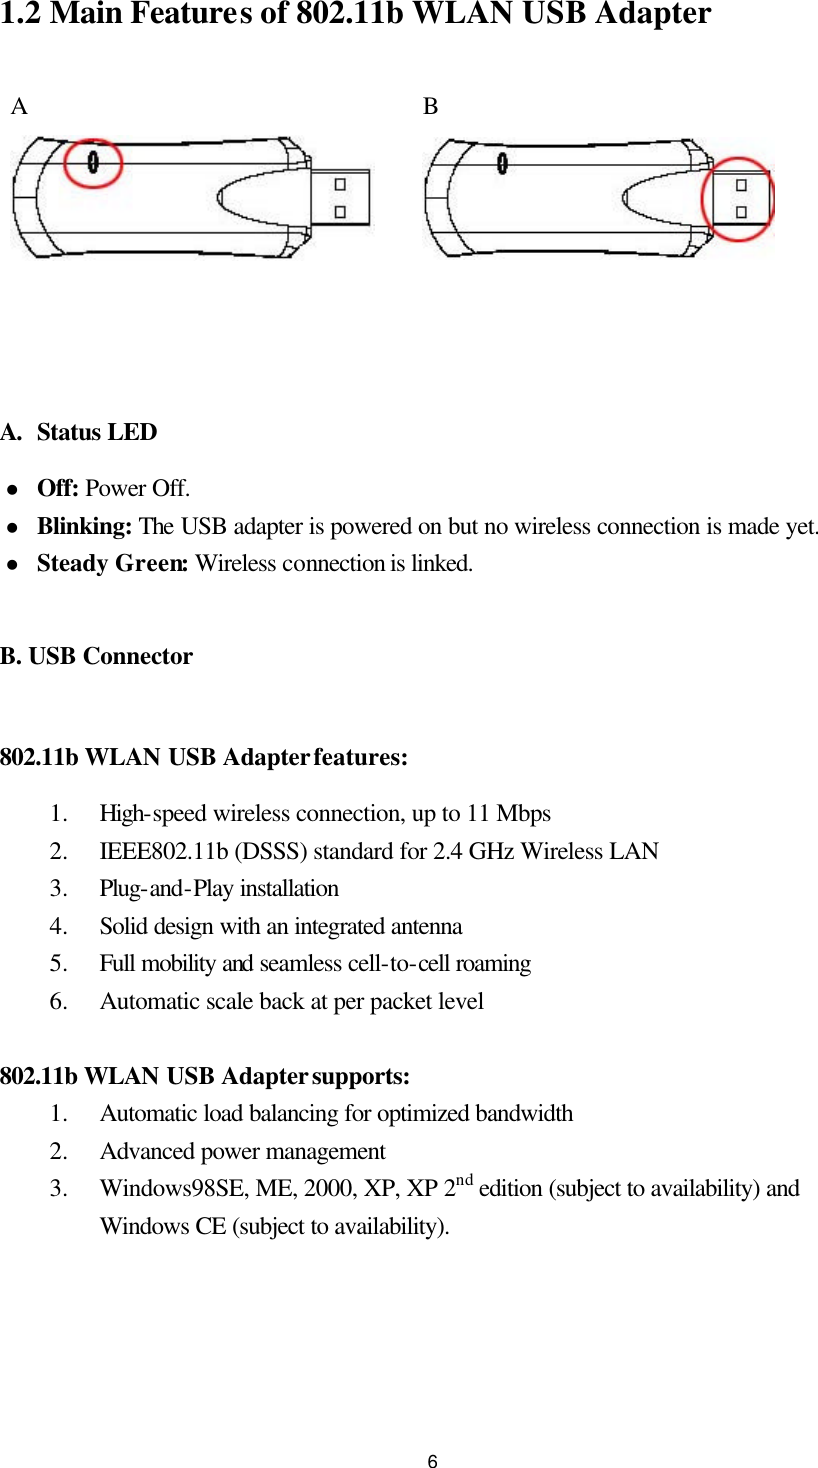  61.2 Main Features of 802.11b WLAN USB Adapter  A      B   A. Status LED l Off: Power Off. l Blinking: The USB adapter is powered on but no wireless connection is made yet. l Steady Green: Wireless connection is linked.  B. USB Connector  802.11b WLAN USB Adapter features: 1.  High-speed wireless connection, up to 11 Mbps 2.  IEEE802.11b (DSSS) standard for 2.4 GHz Wireless LAN 3.  Plug-and-Play installation 4.  Solid design with an integrated antenna 5.  Full mobility and seamless cell-to-cell roaming 6.  Automatic scale back at per packet level  802.11b WLAN USB Adapter supports: 1.  Automatic load balancing for optimized bandwidth 2.  Advanced power management 3.  Windows98SE, ME, 2000, XP, XP 2nd edition (subject to availability) and Windows CE (subject to availability).   